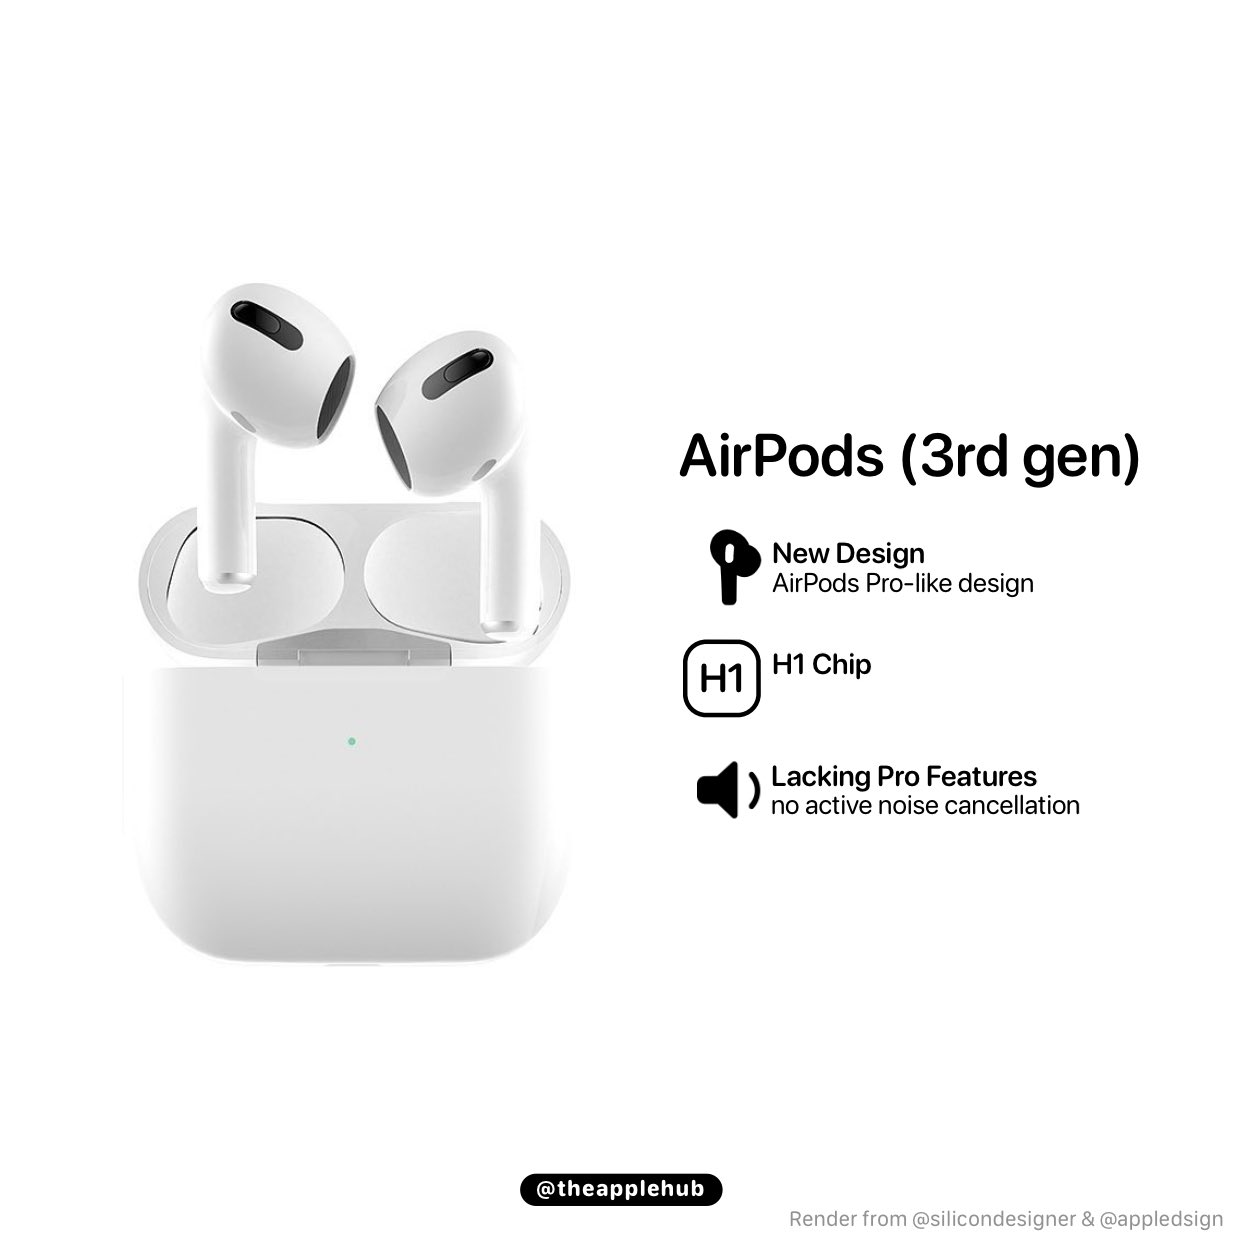 Apple Hub Twitter: "Apple is working on 3rd generation AirPods that will adopt a similar form factor to the AirPods Pro without noise cancellation for a rumored price of $199.